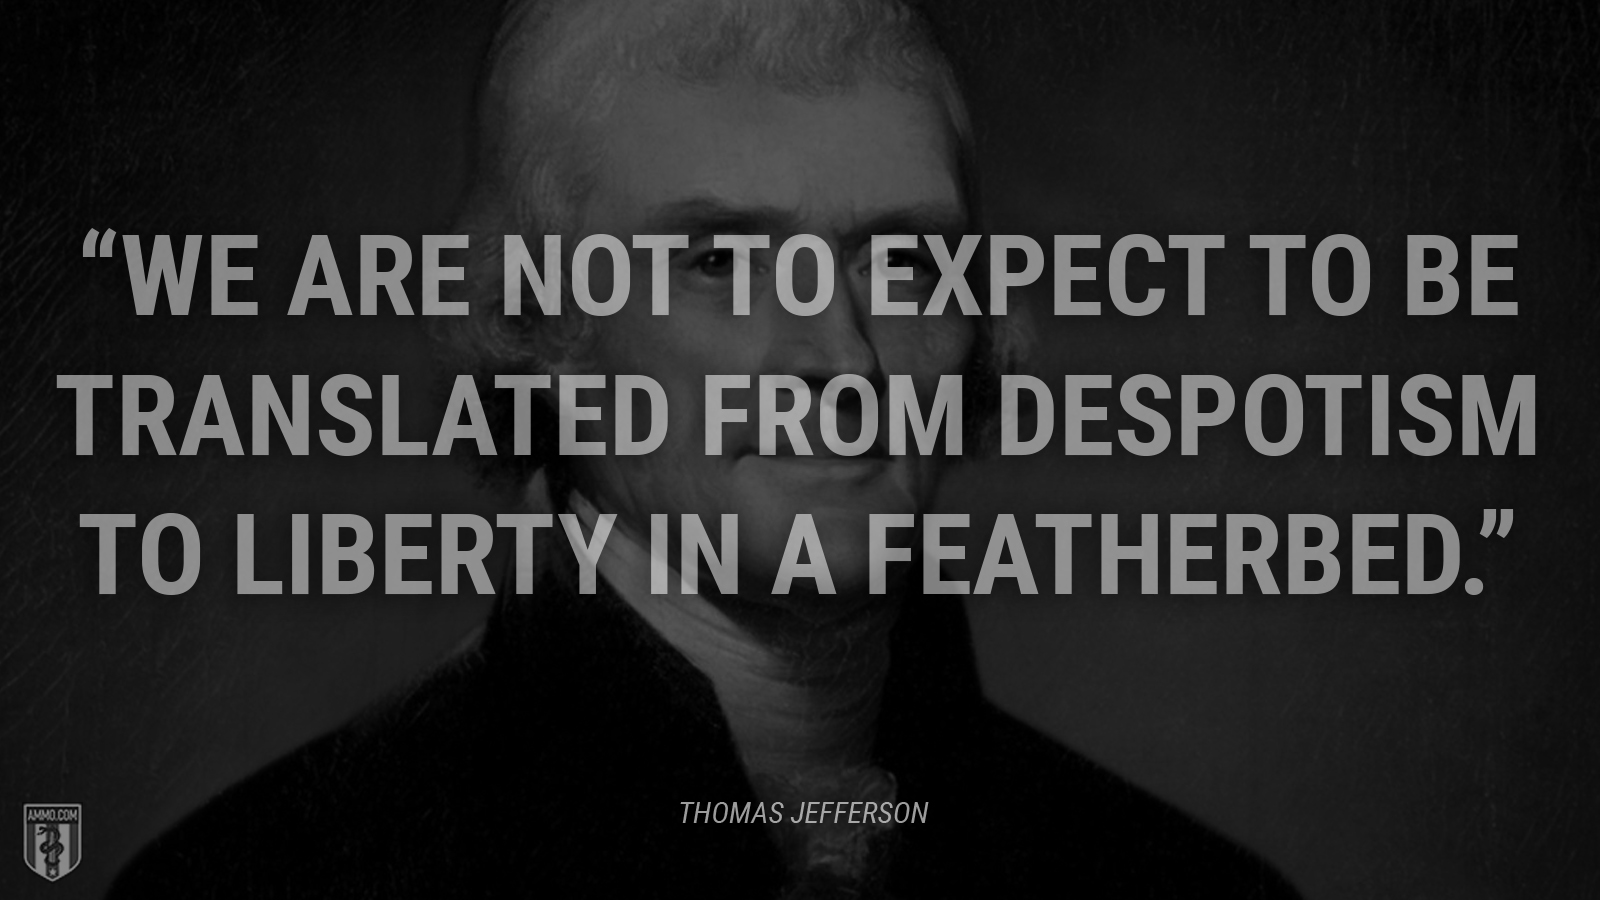 “We are not to expect to be translated from despotism to liberty in a featherbed.” - Thomas Jefferson